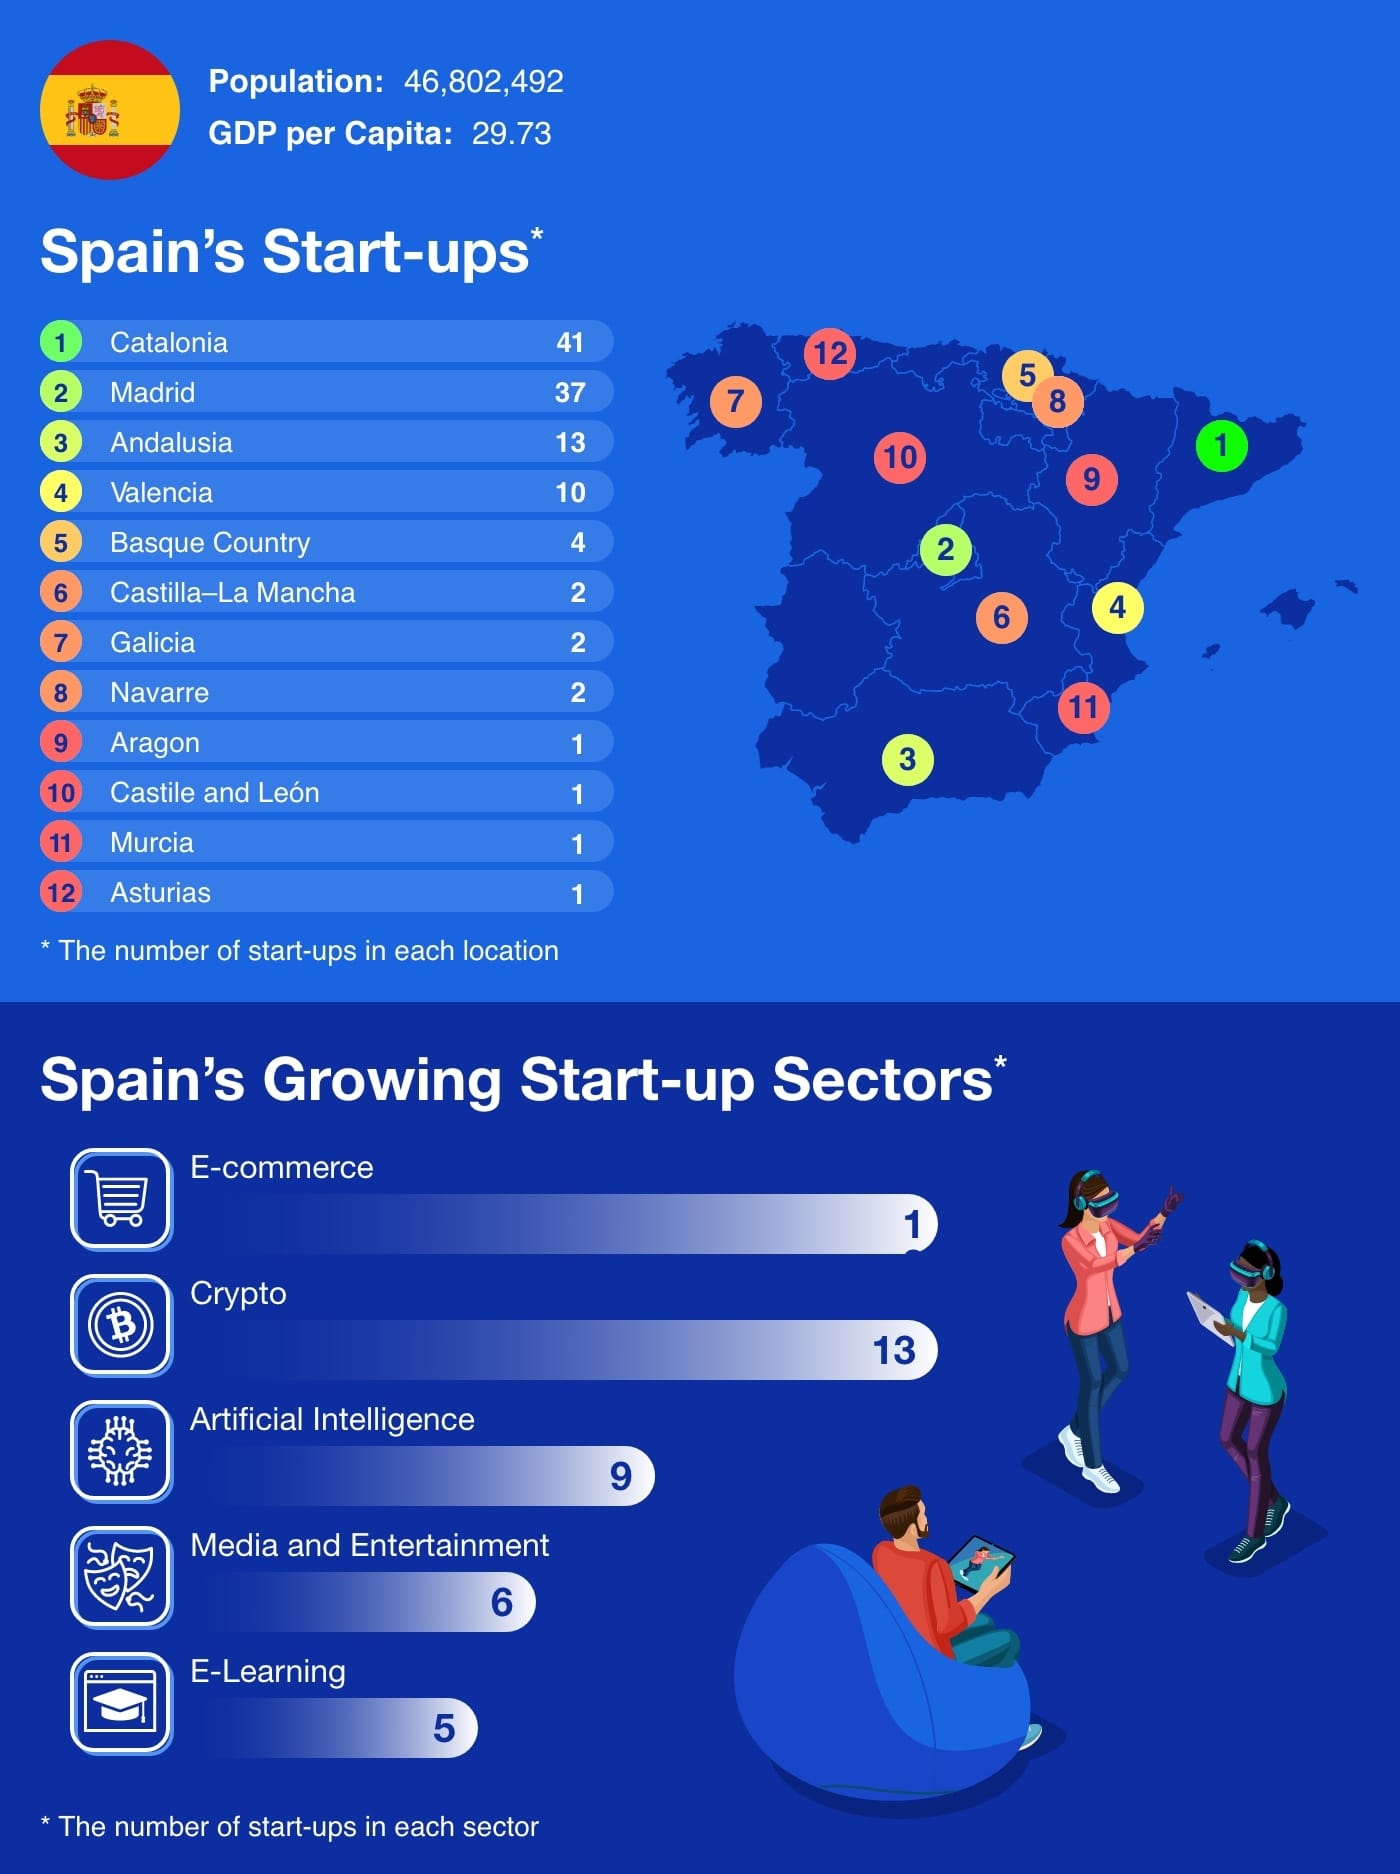 Infographic showing the number of Spain's start-ups by location and sector